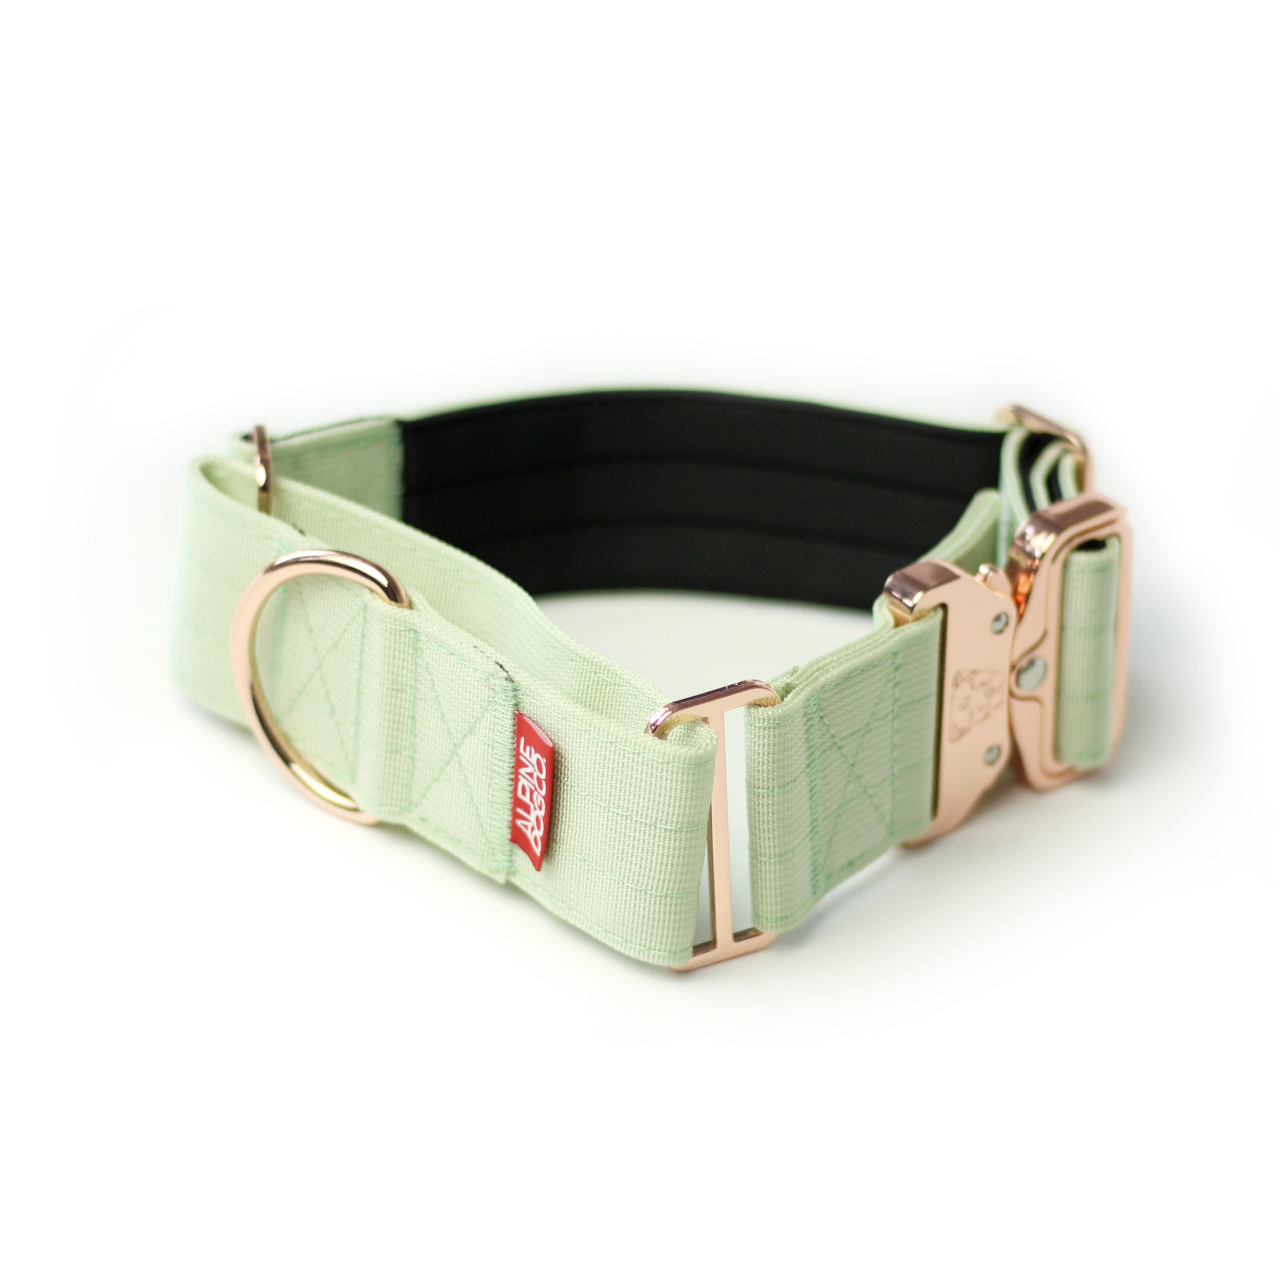 2" Luxe Martingale Dog Collar - Rose Gold - Honeydew